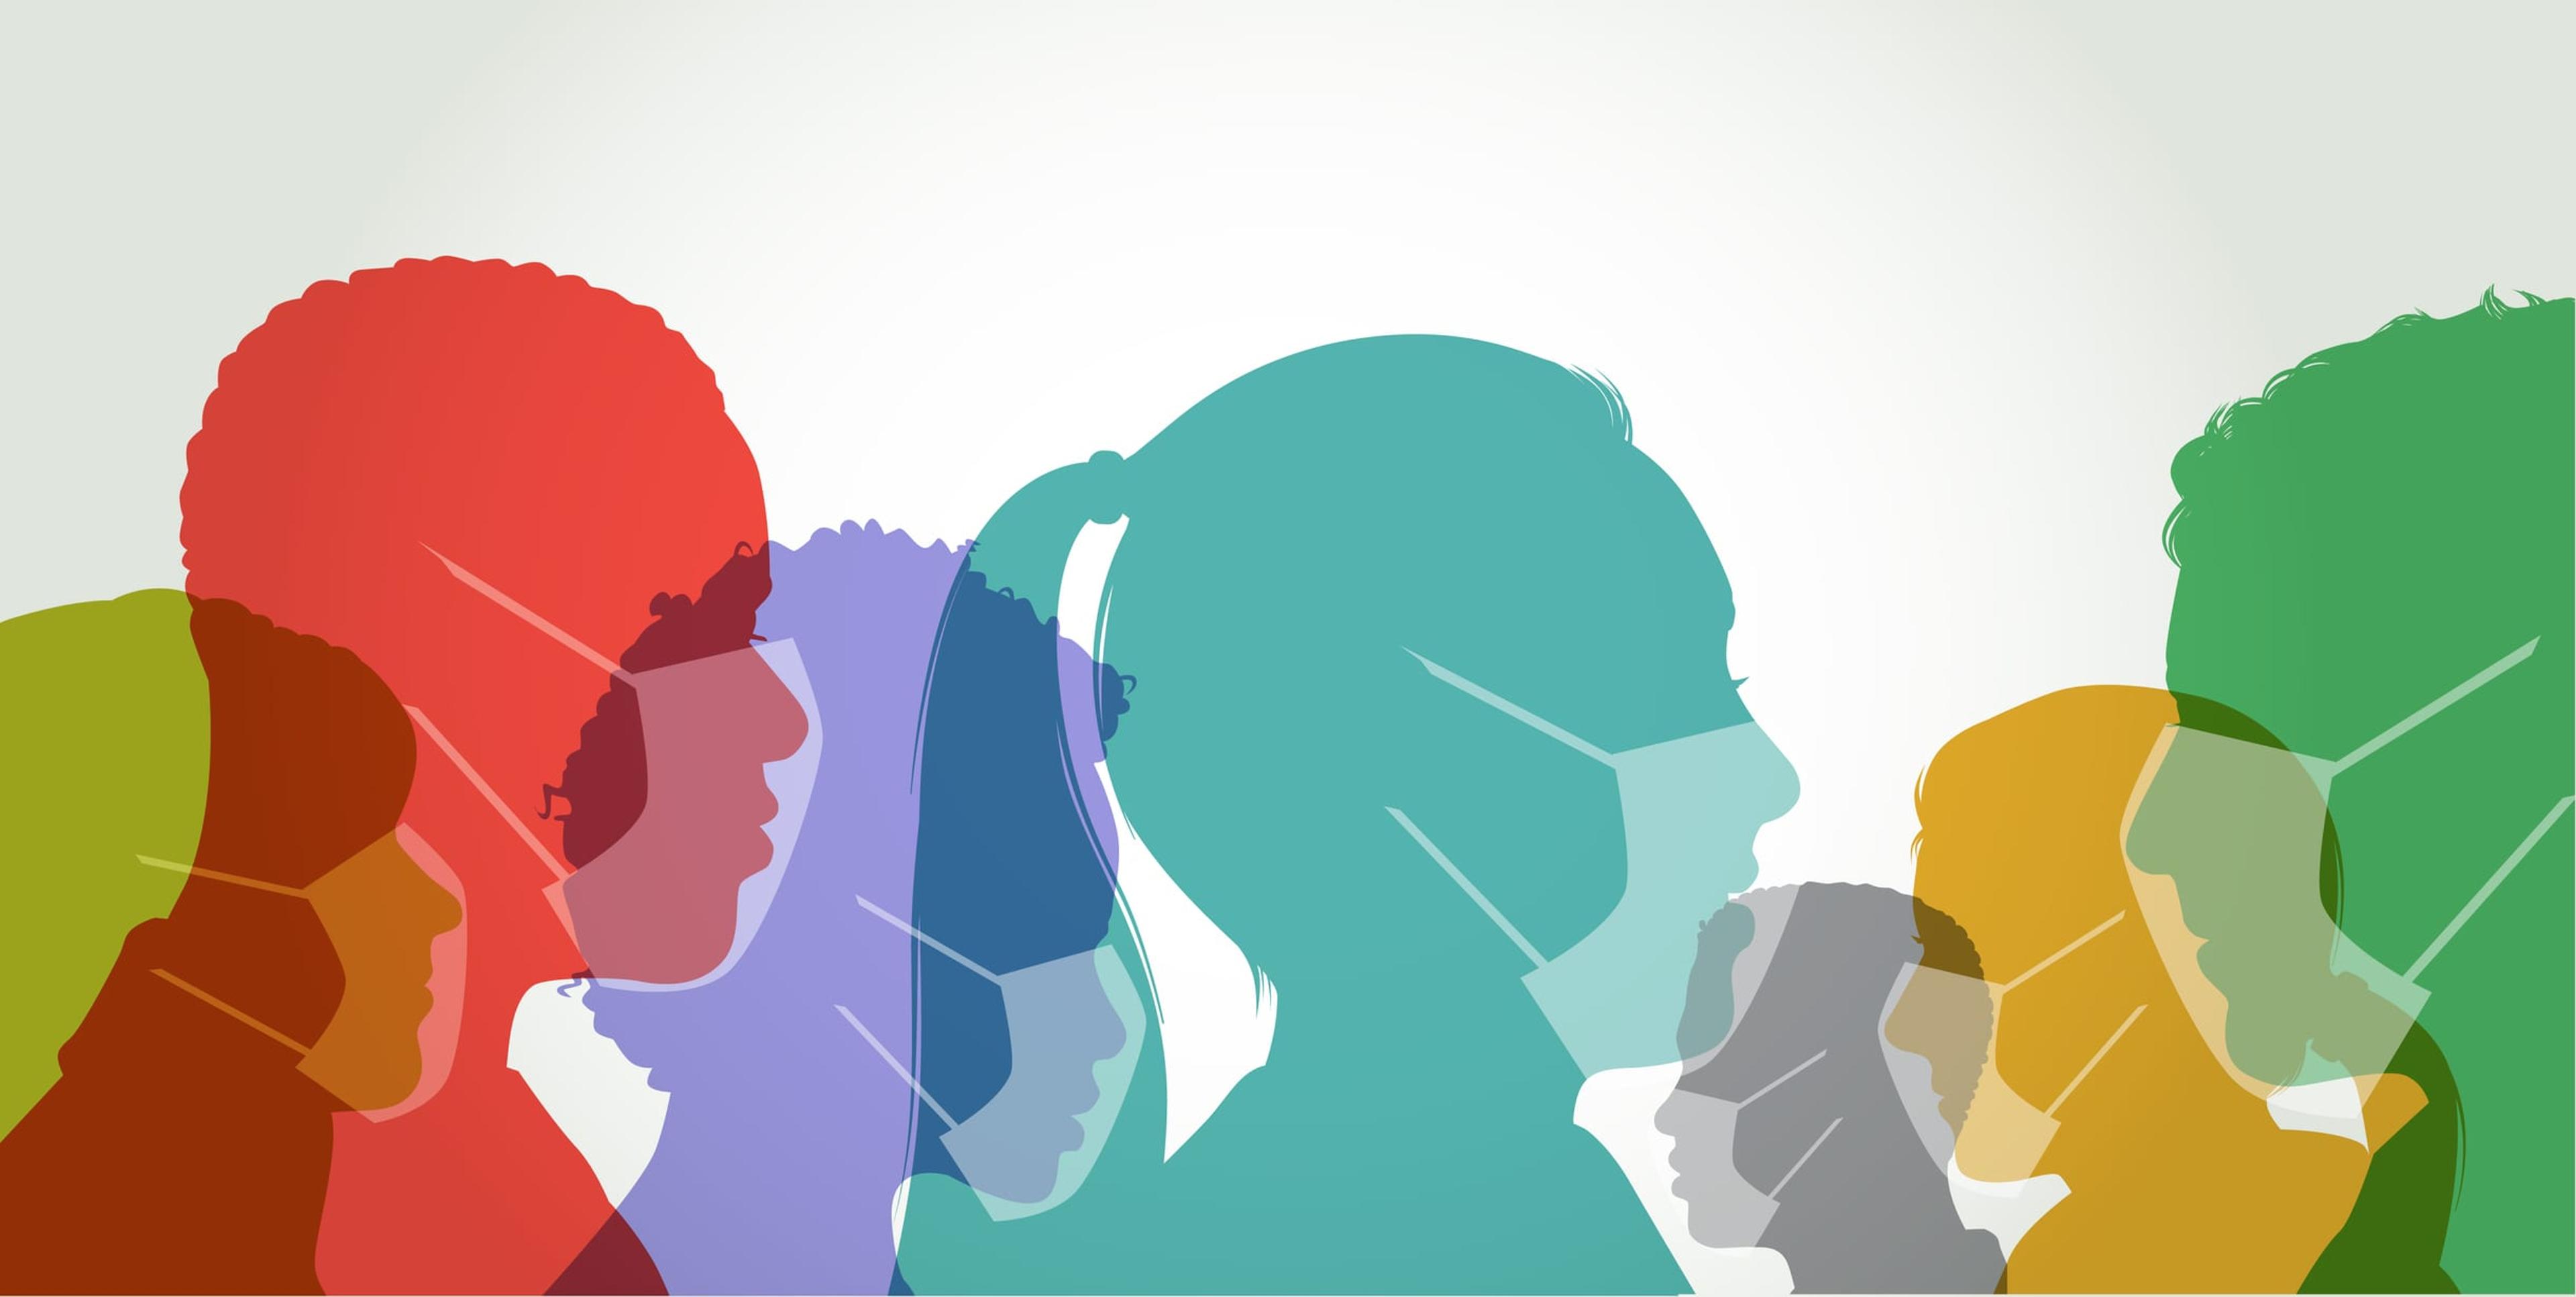 Graphic of colorful silhouettes of people wearing face masks